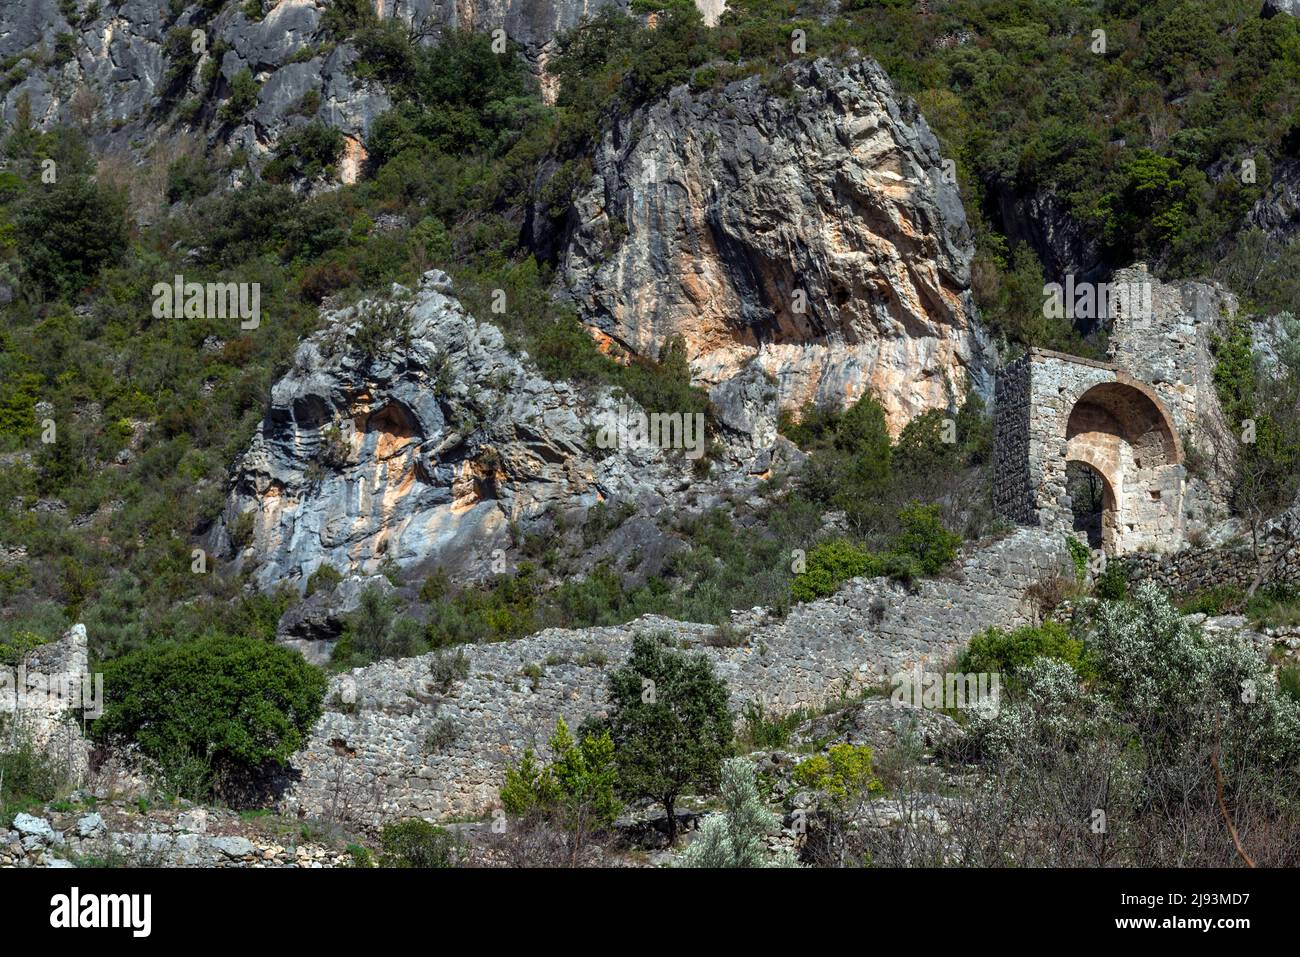 Remains of the medieval stone wall and entrance port to Saint Guillhem le Desert in the Herault department in the south of France. Stock Photo